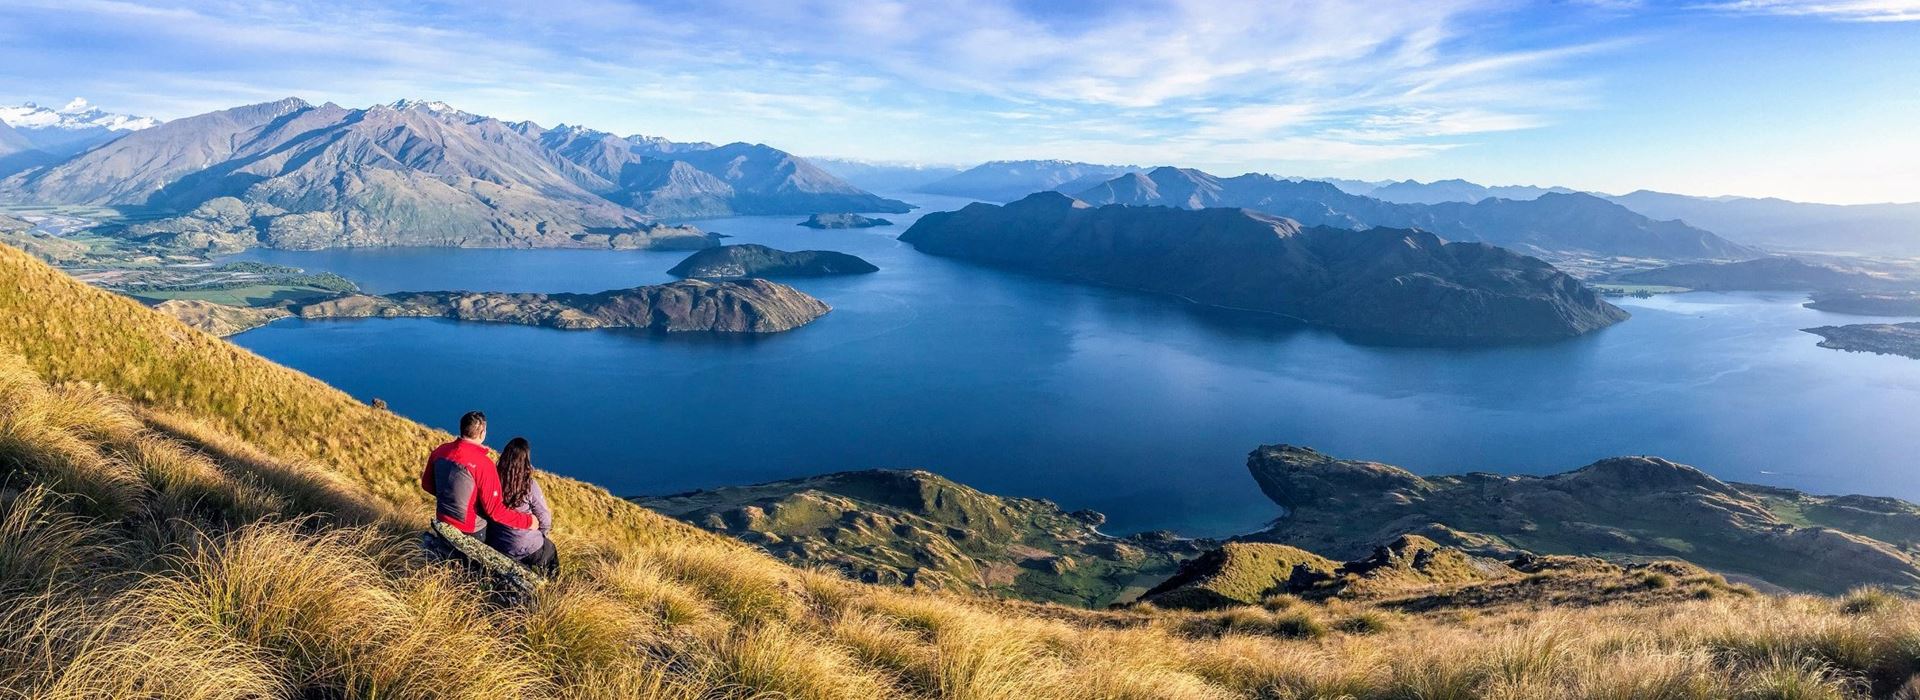 15-Day Discover & Exploration Tour of an Authentic New Zealand